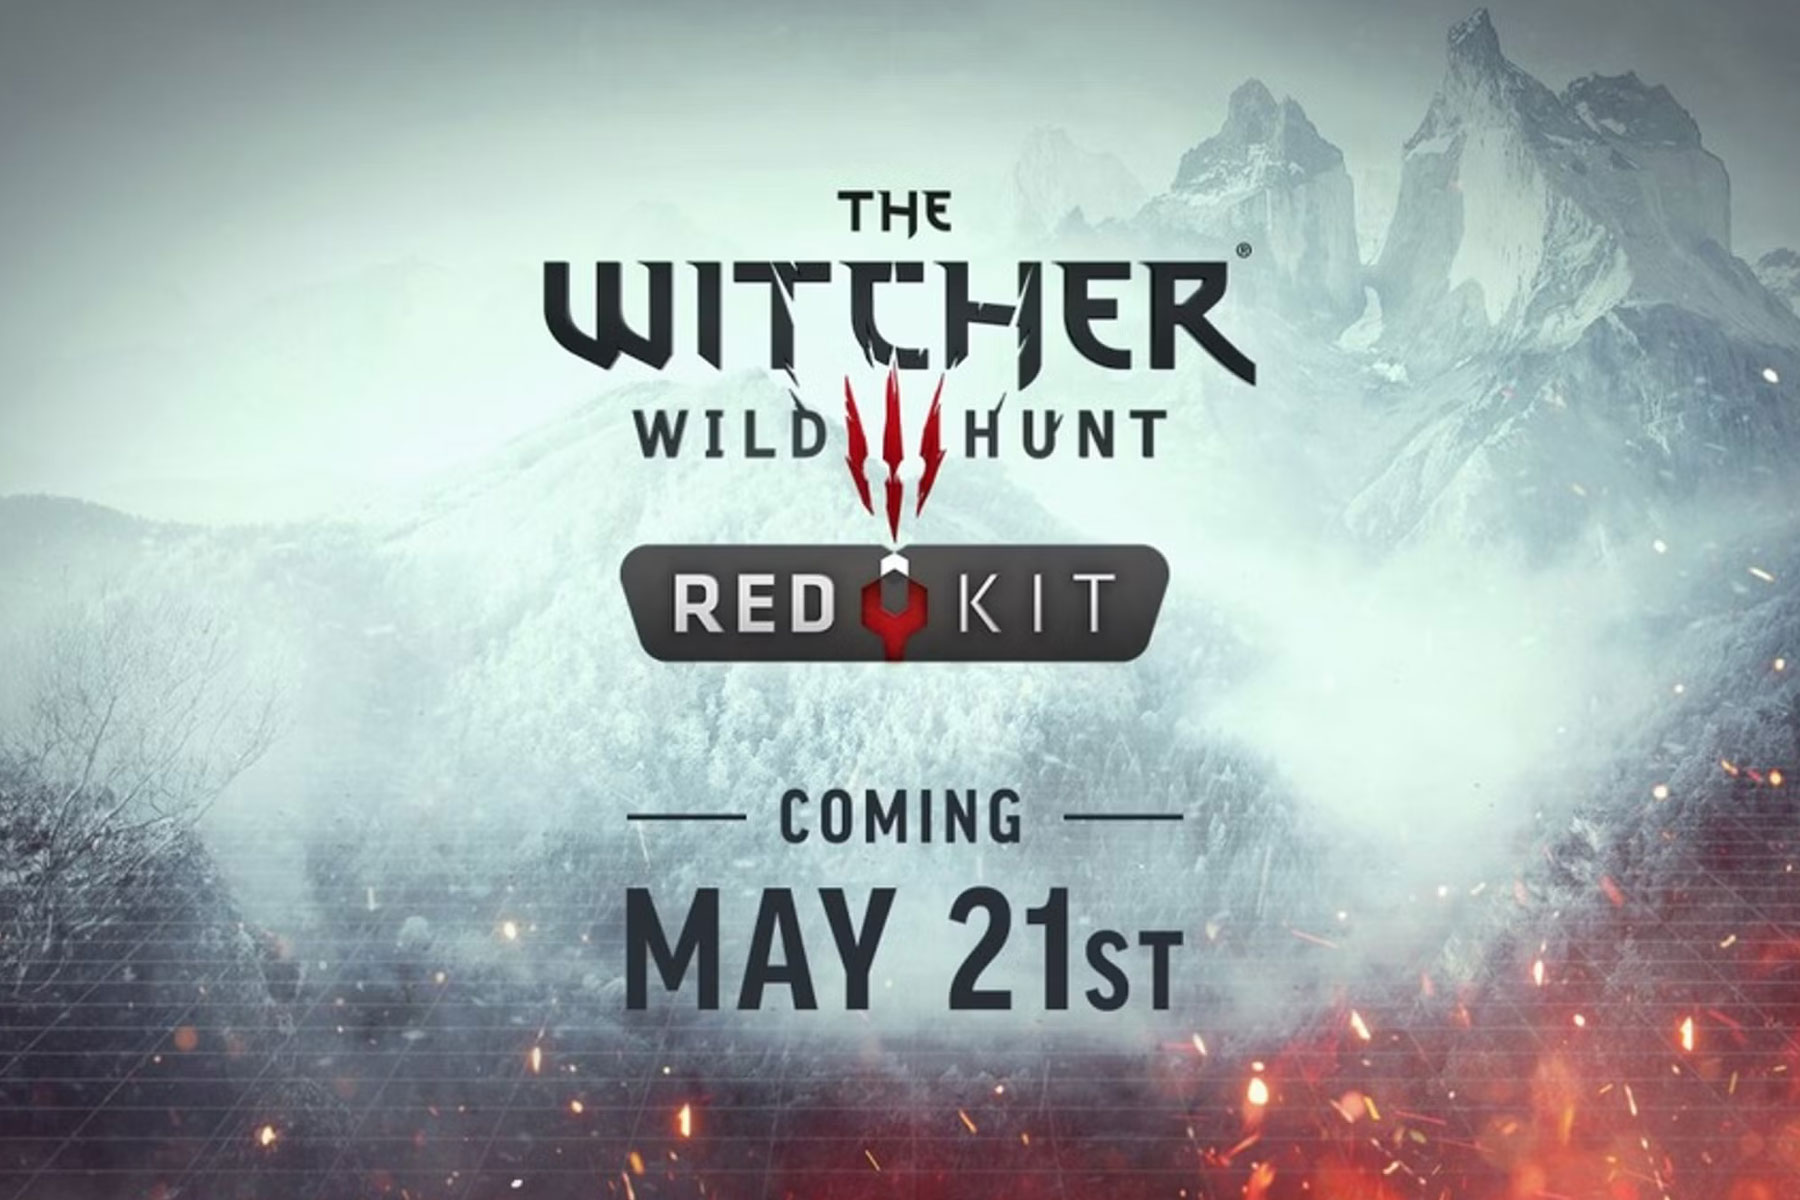 Witcher 3 REDkit, a free modding tool is set to release in May